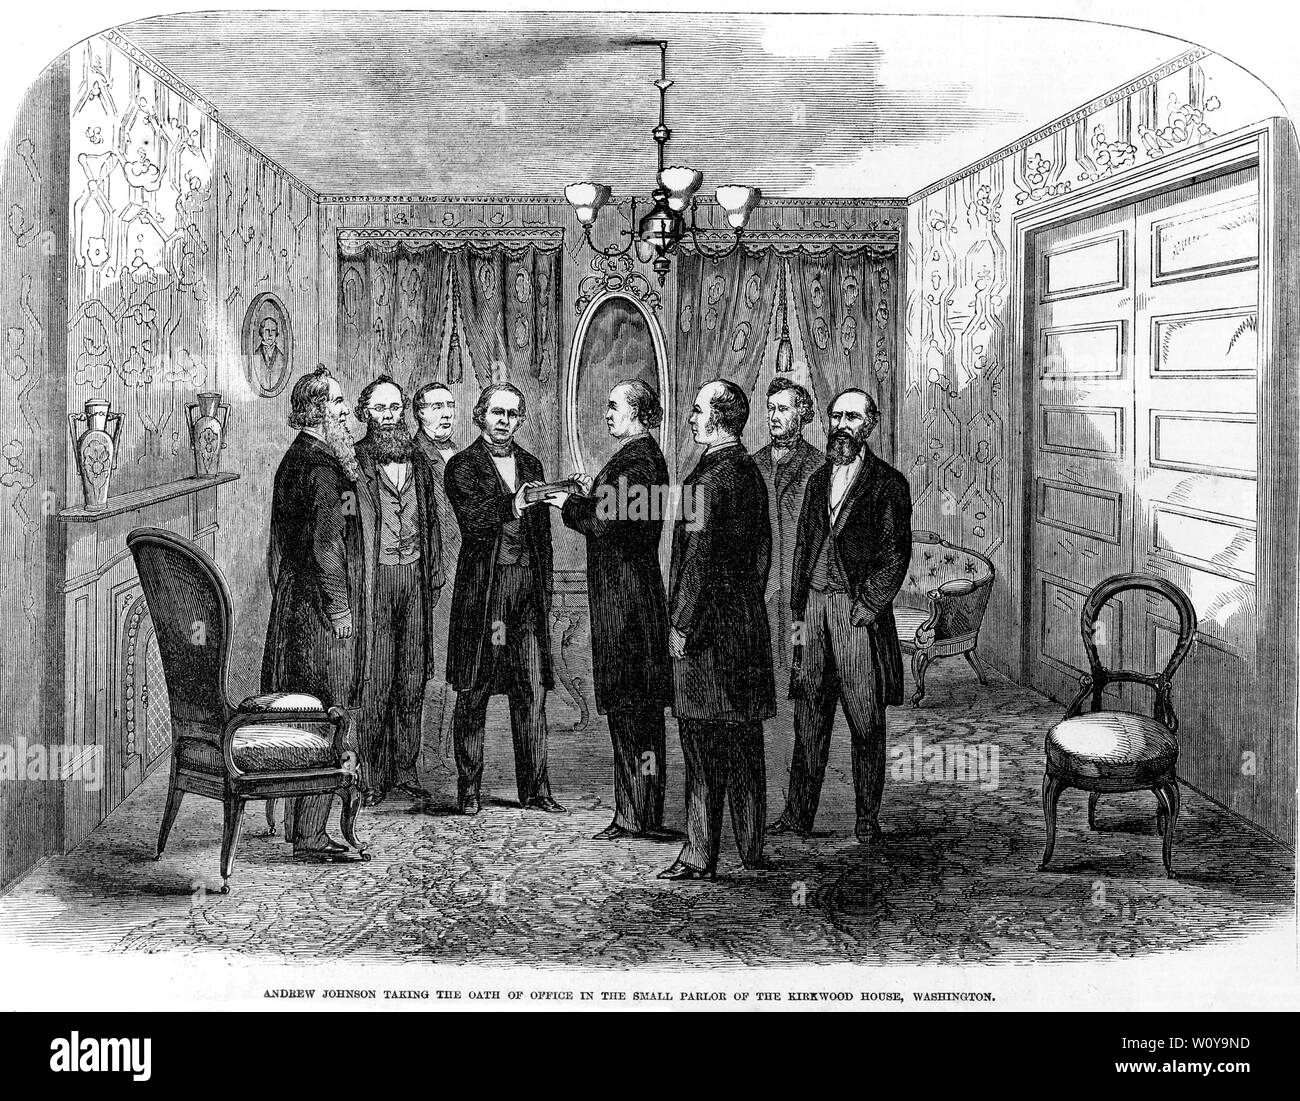 Andrew Johnson taking the oath of office in the Small parlor of Kirkwood House, Washington, April 15, 1865, Illustration, Frank Leslie's Illustrated Newspaper, January 6, 1866 Stock Photo